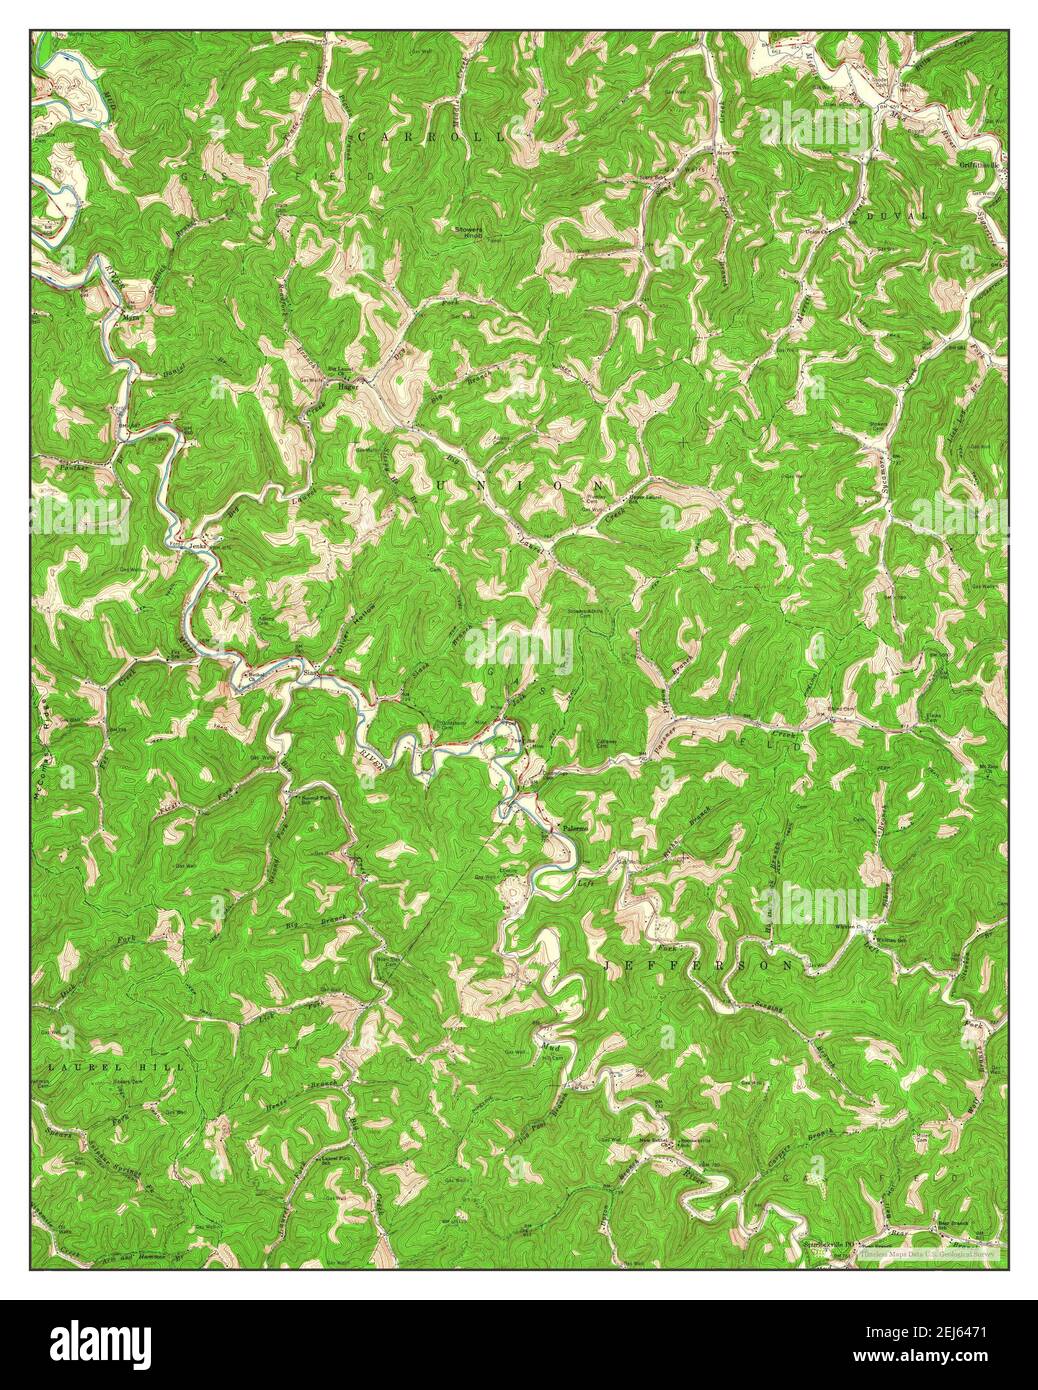 Hager, West Virginia, map 1962, 1:24000, United States of America by Timeless Maps, data U.S. Geological Survey Stock Photo